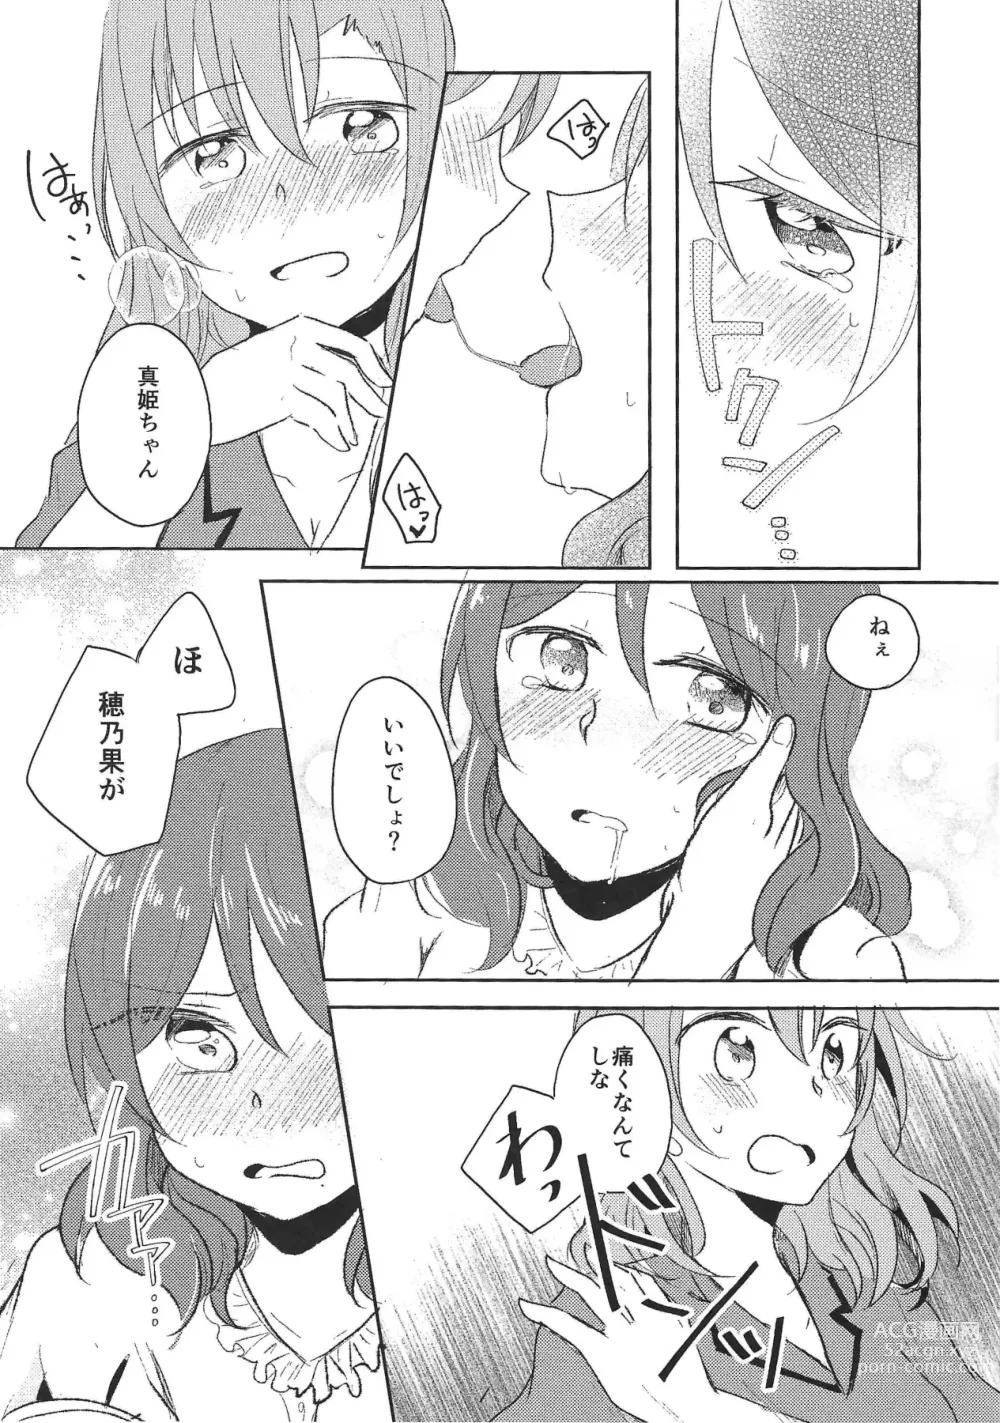 Page 8 of doujinshi LOVE STEP